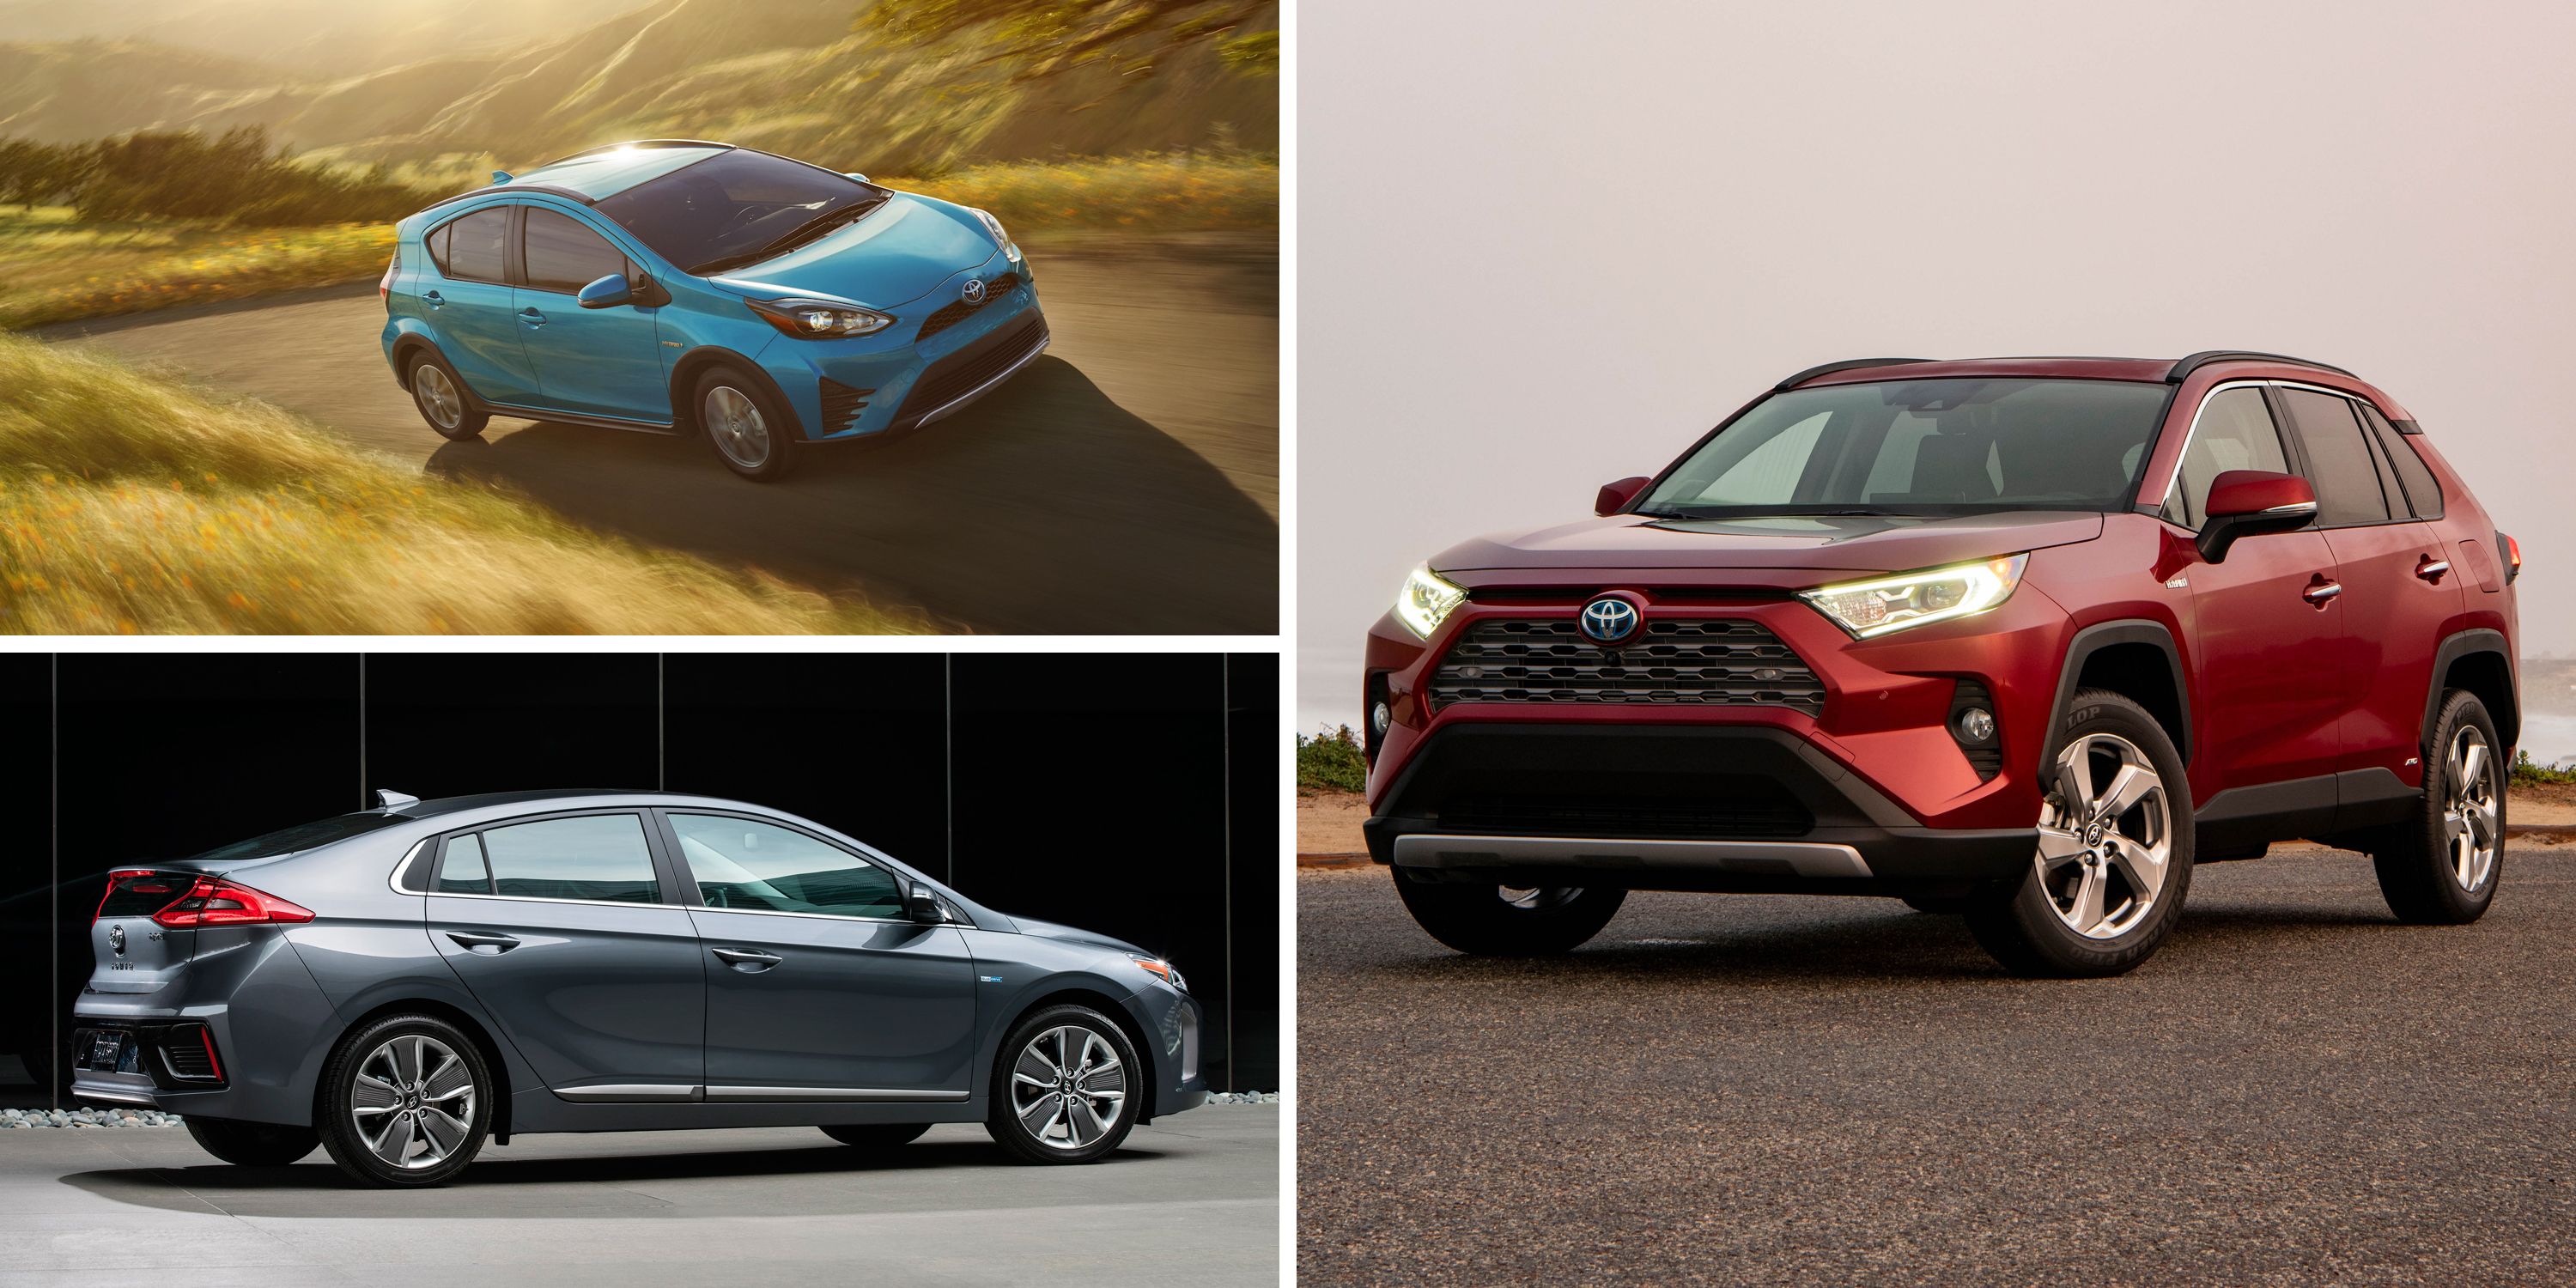 The 10 Cheapest Cars SUVs You Can Buy in 2019